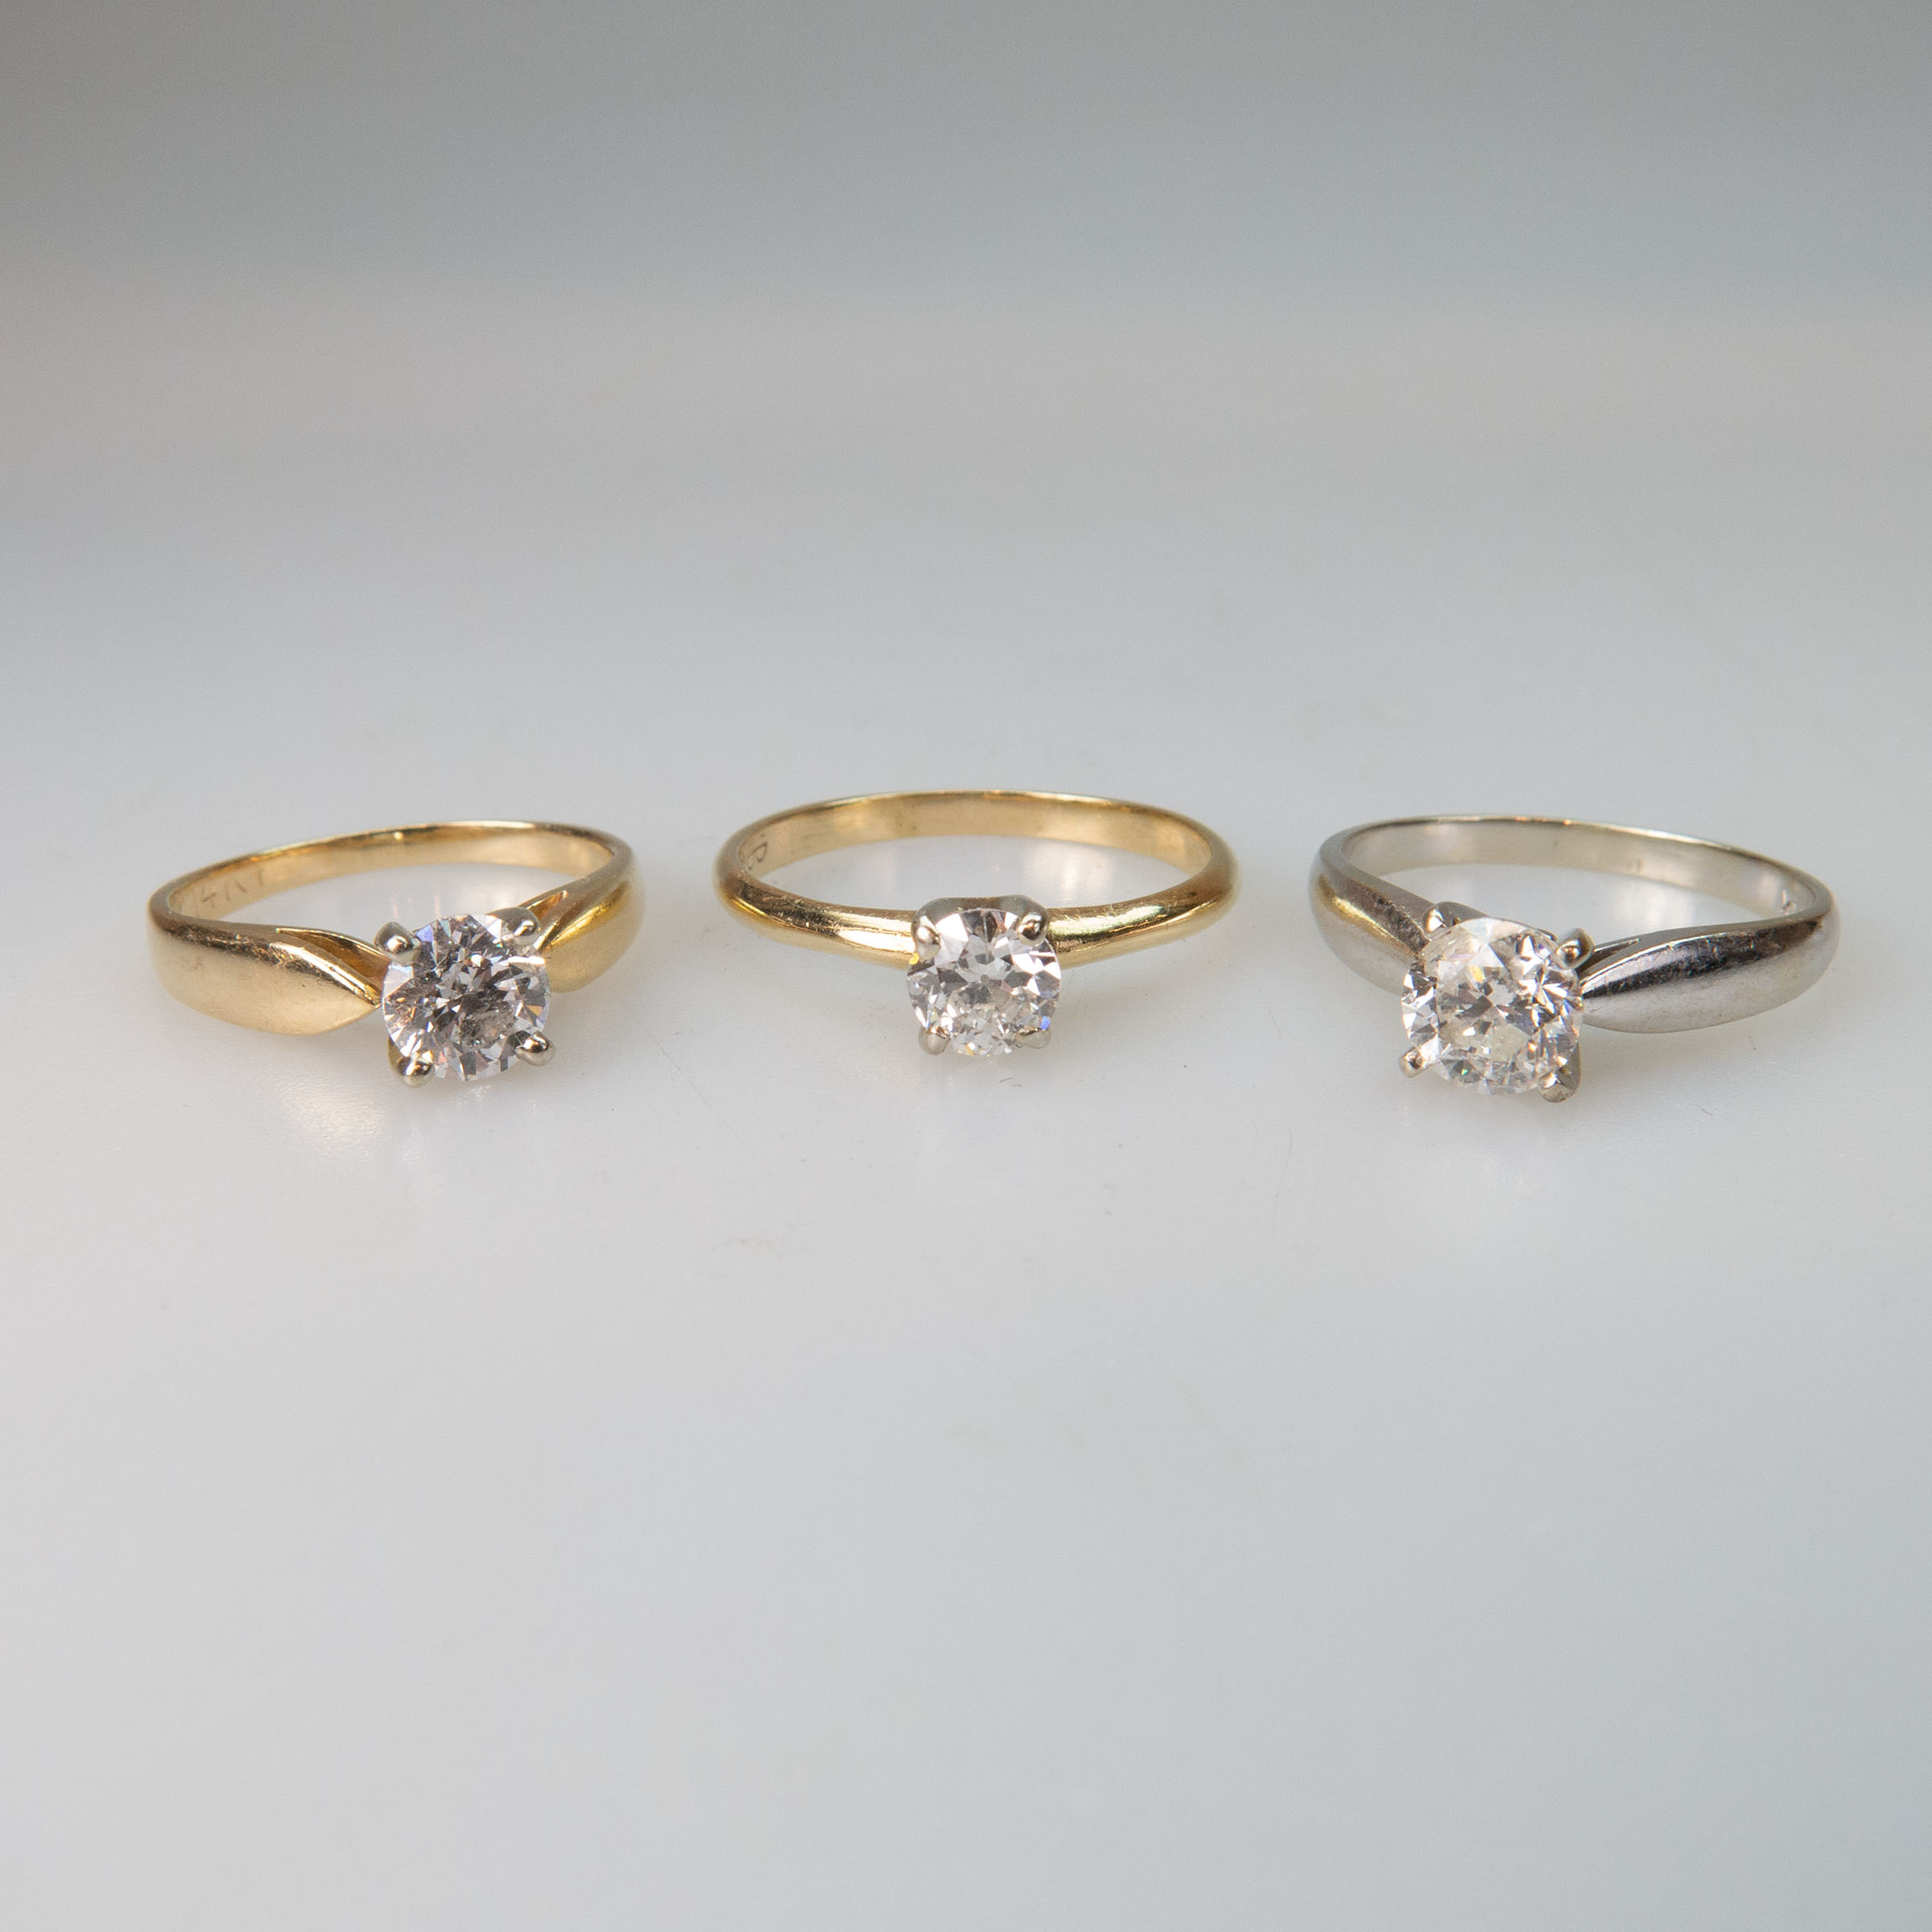 3 x 14k Gold Solitaire Rings